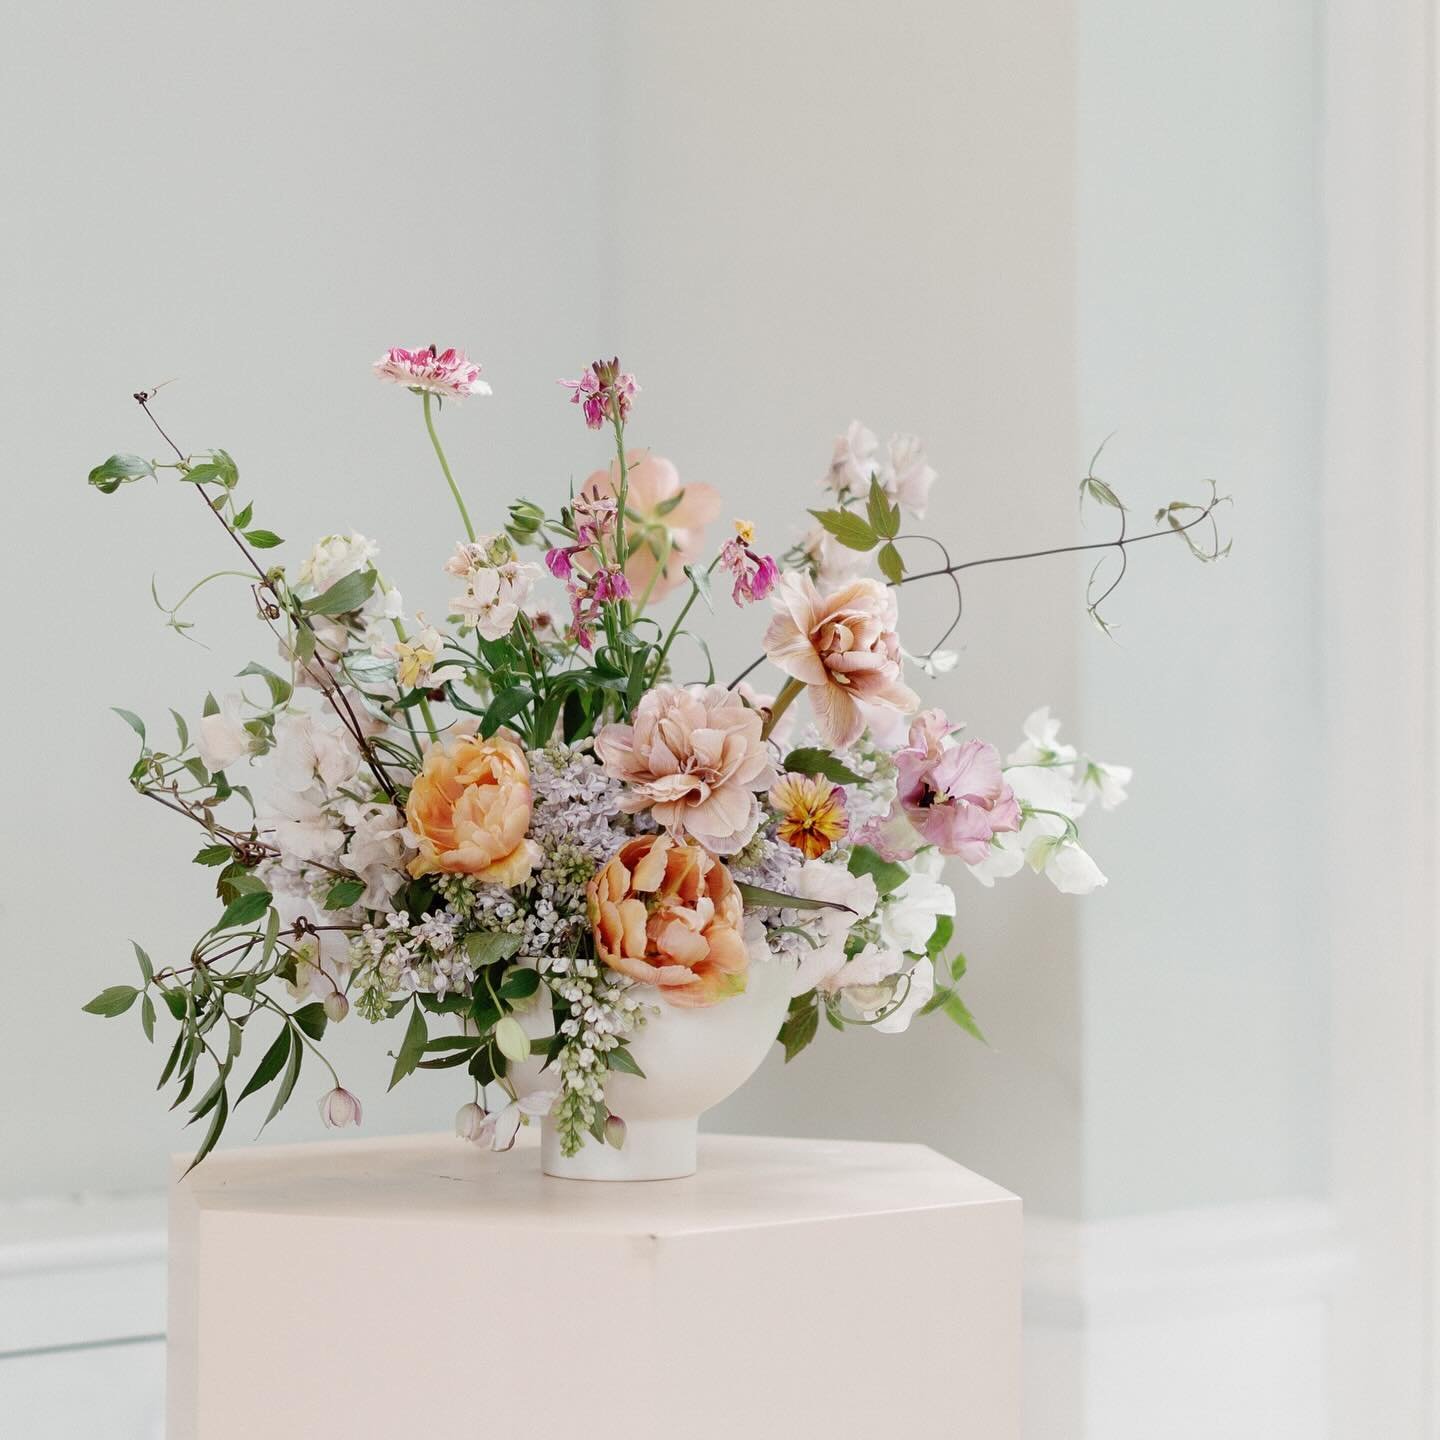 A moment for for my love of SPRING flowers🌷

An amazing workshop by @gaiavessels 
Photography: @chloeelyphotography